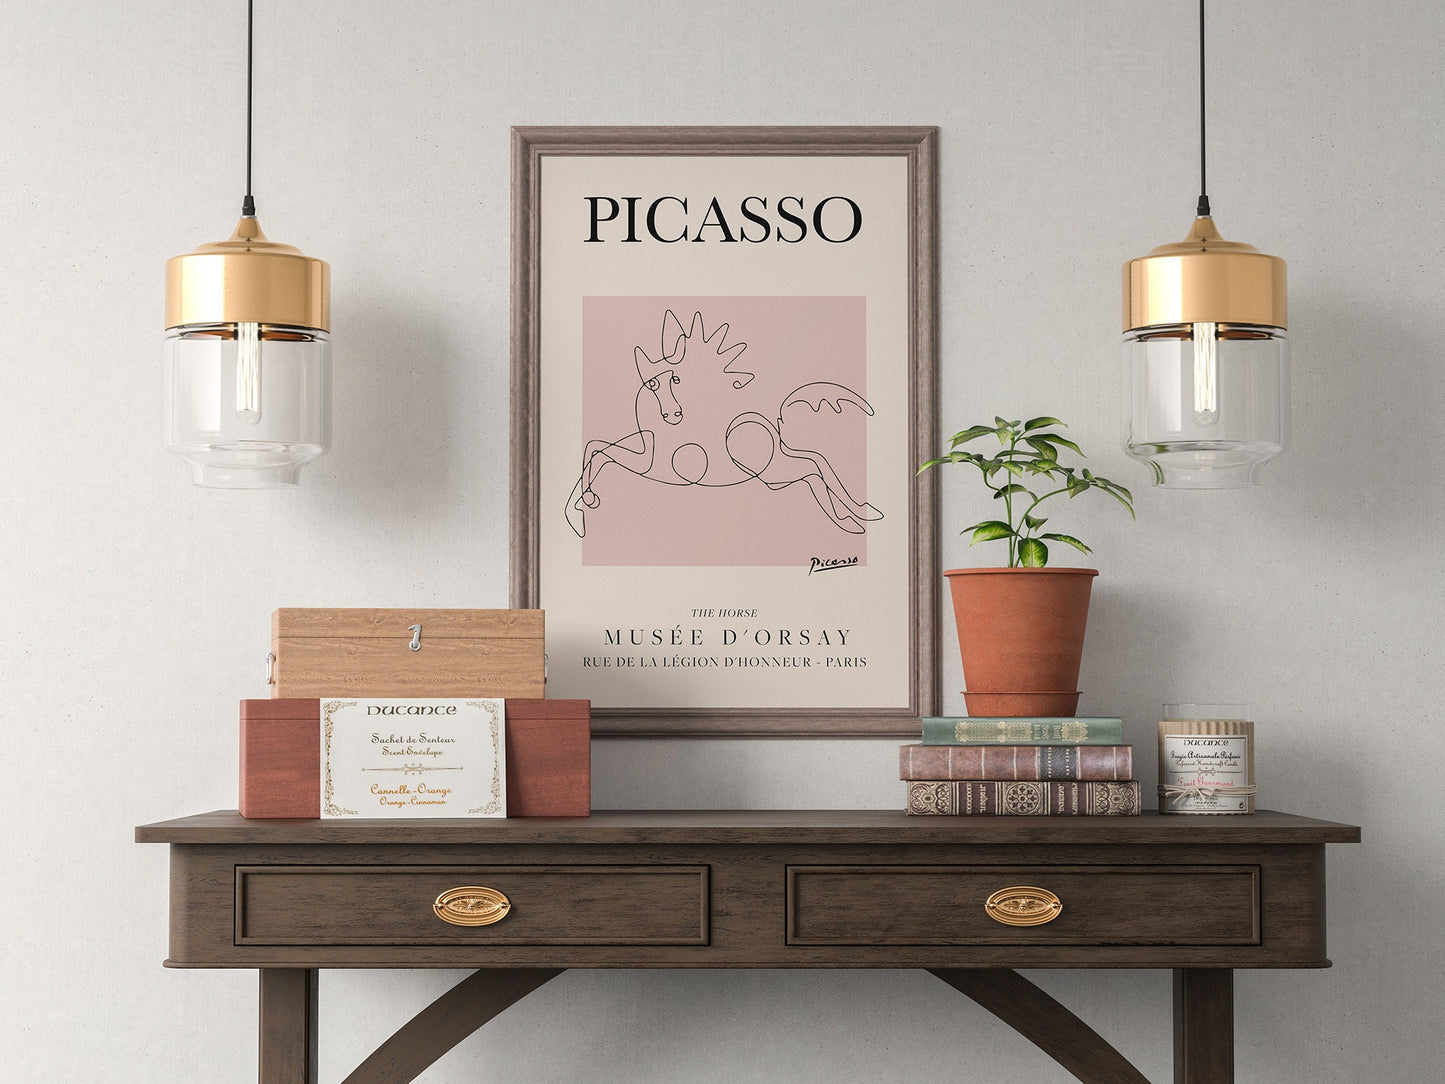 Picasso - Horse, Exhibition Vintage Line Art Poster, Minimalist Line Drawing, Ideal Home Decor or Gift Print